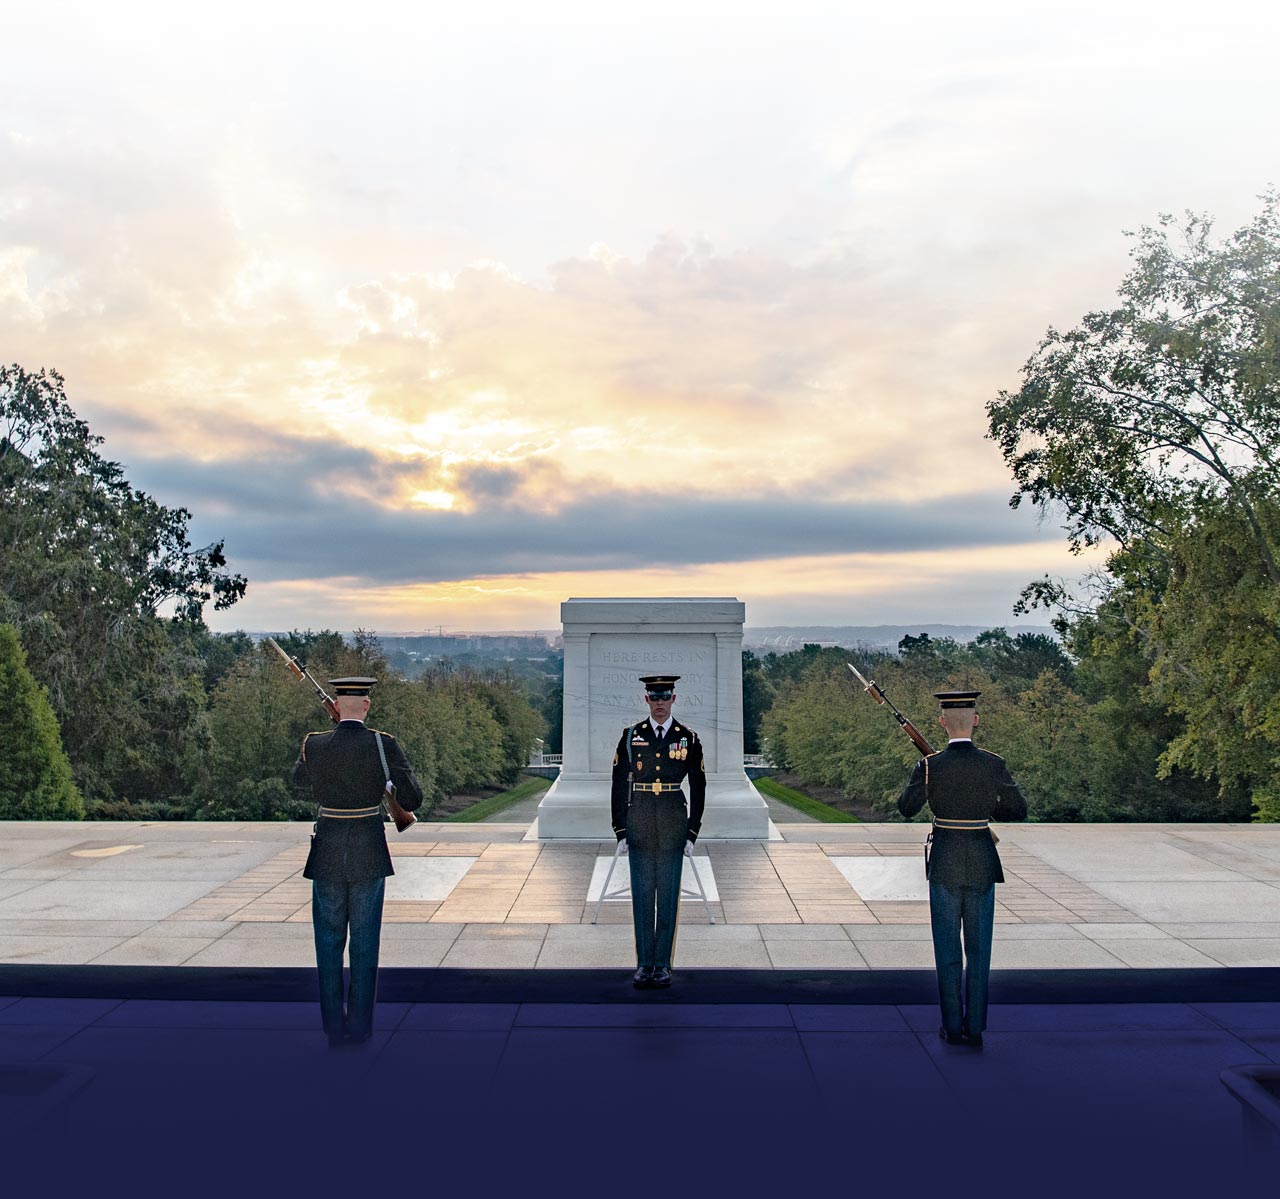 Servicemen in uniform guarding the Tomb of the Unknown Soldier